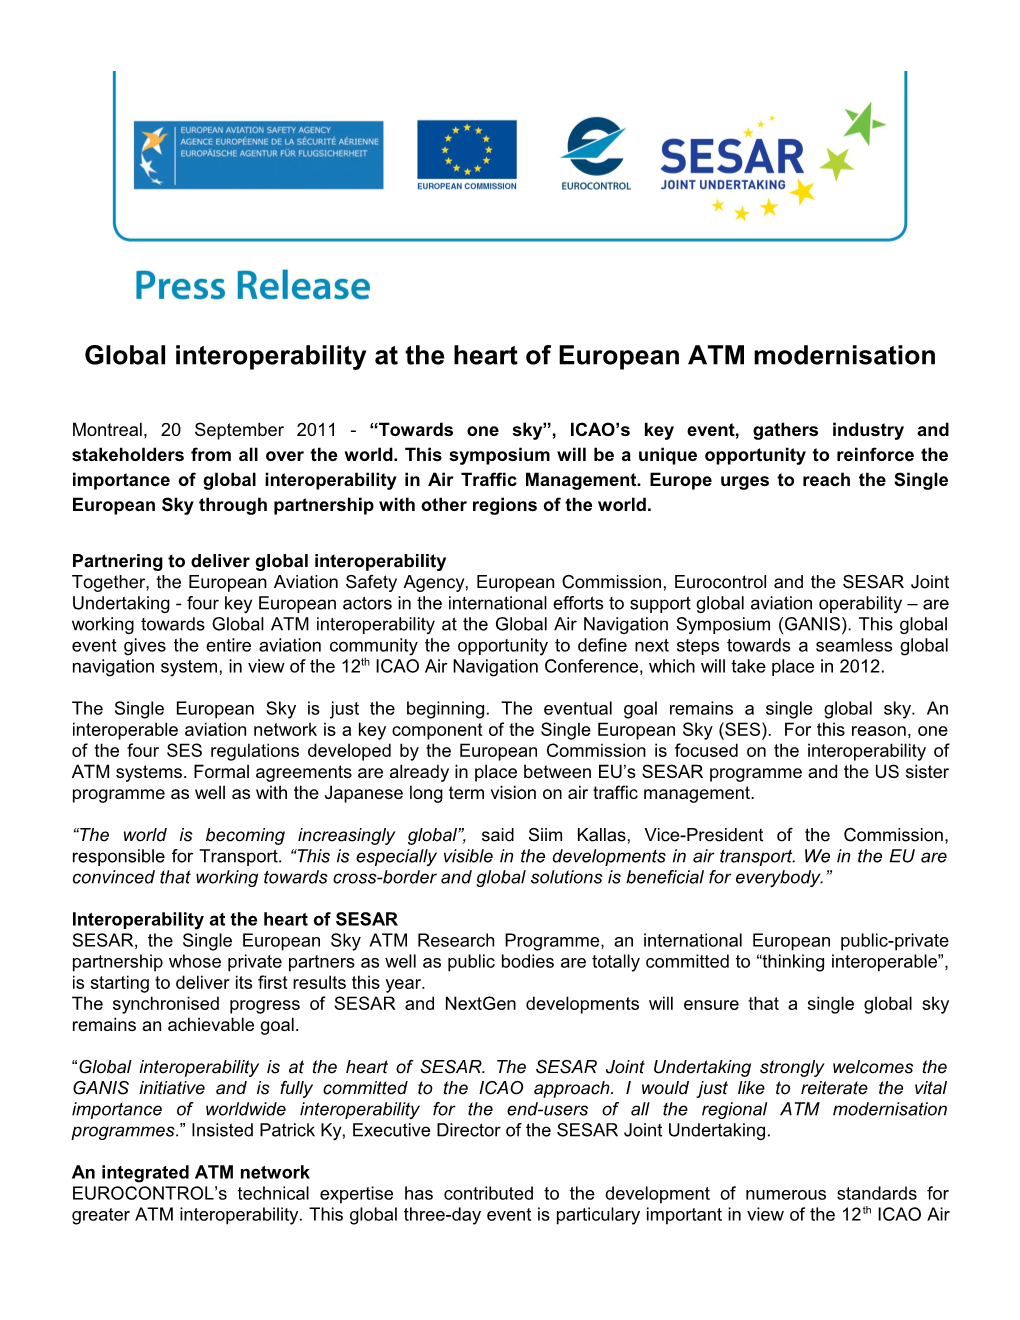 Global Interoperability at the Heart of European ATM Modernisation